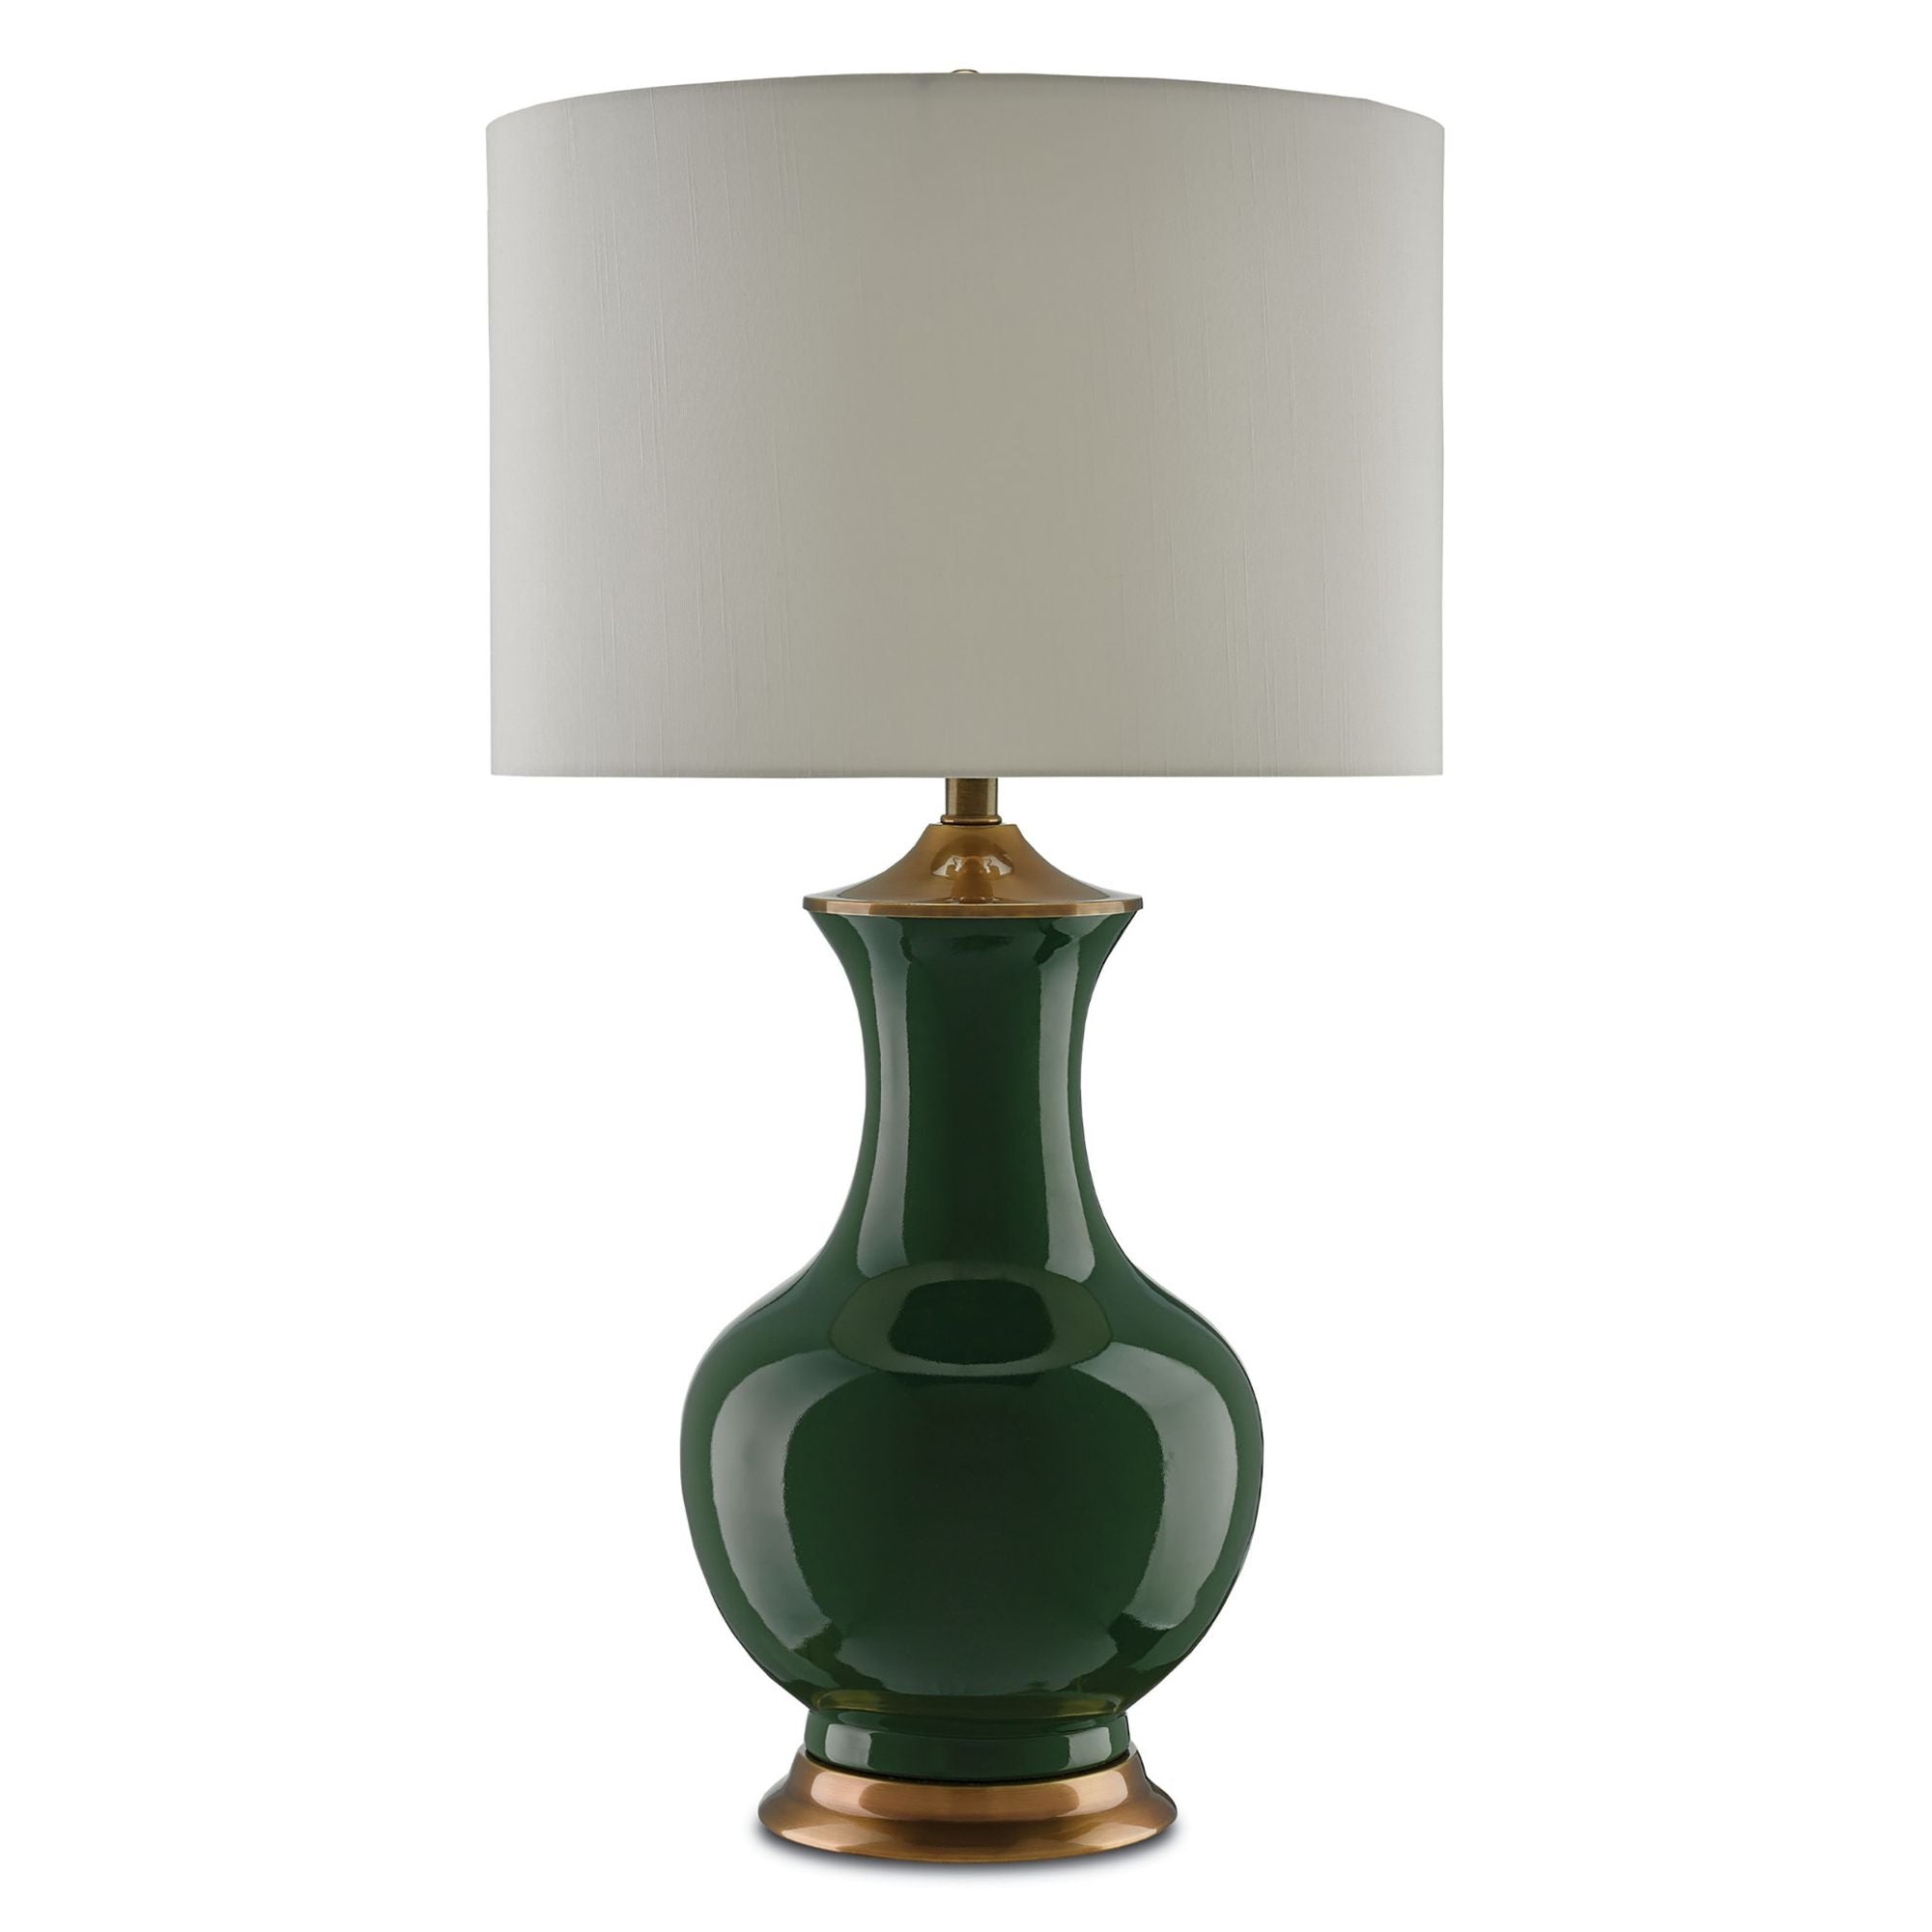 Lilou Green Table Lamp - Green/Antique Brass